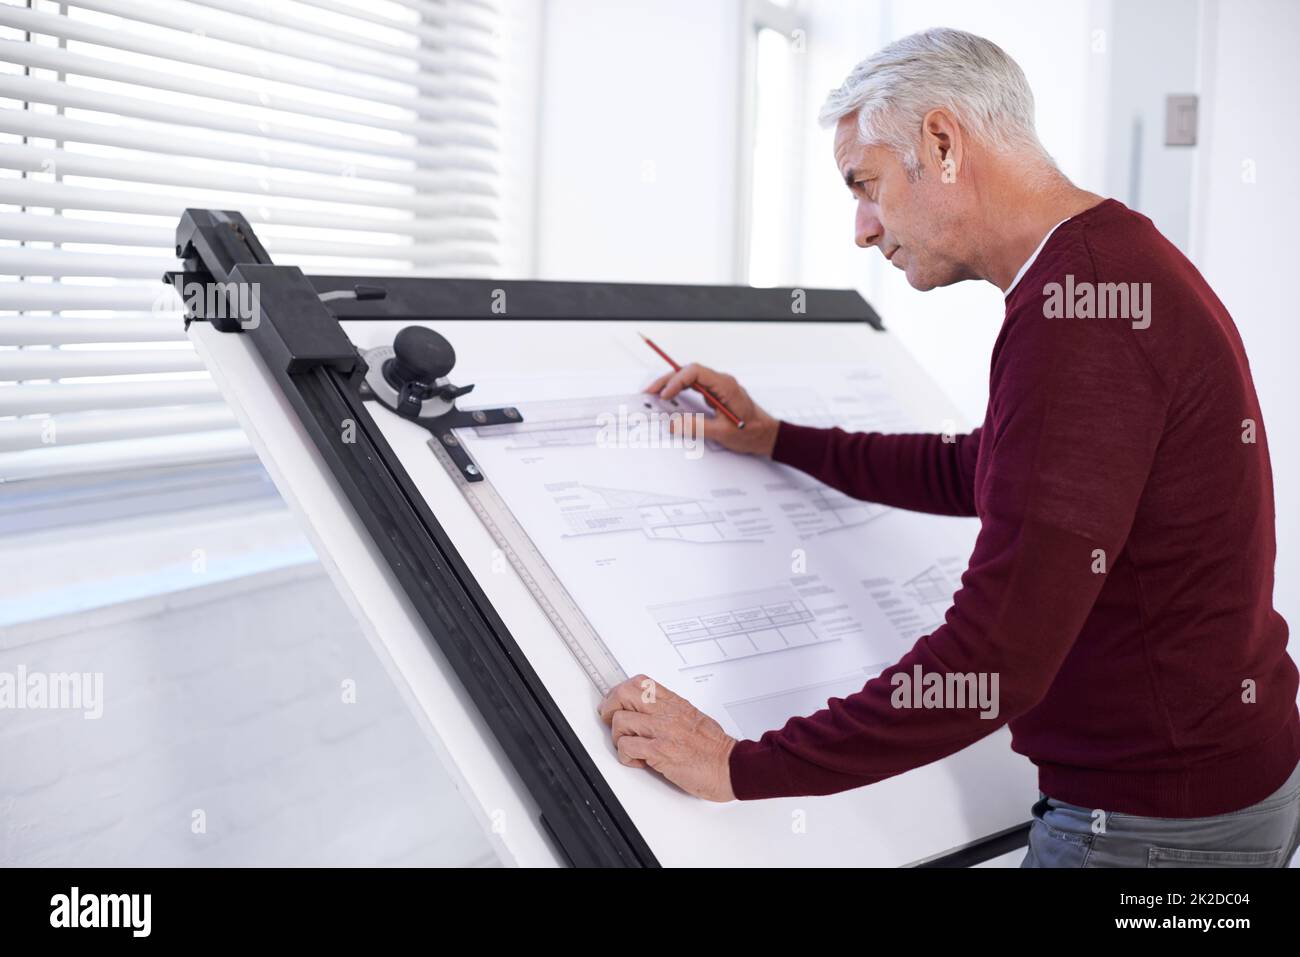 Doing what he does best. Cropped shot of a male architect working on a building plan at a drawing board. Stock Photo